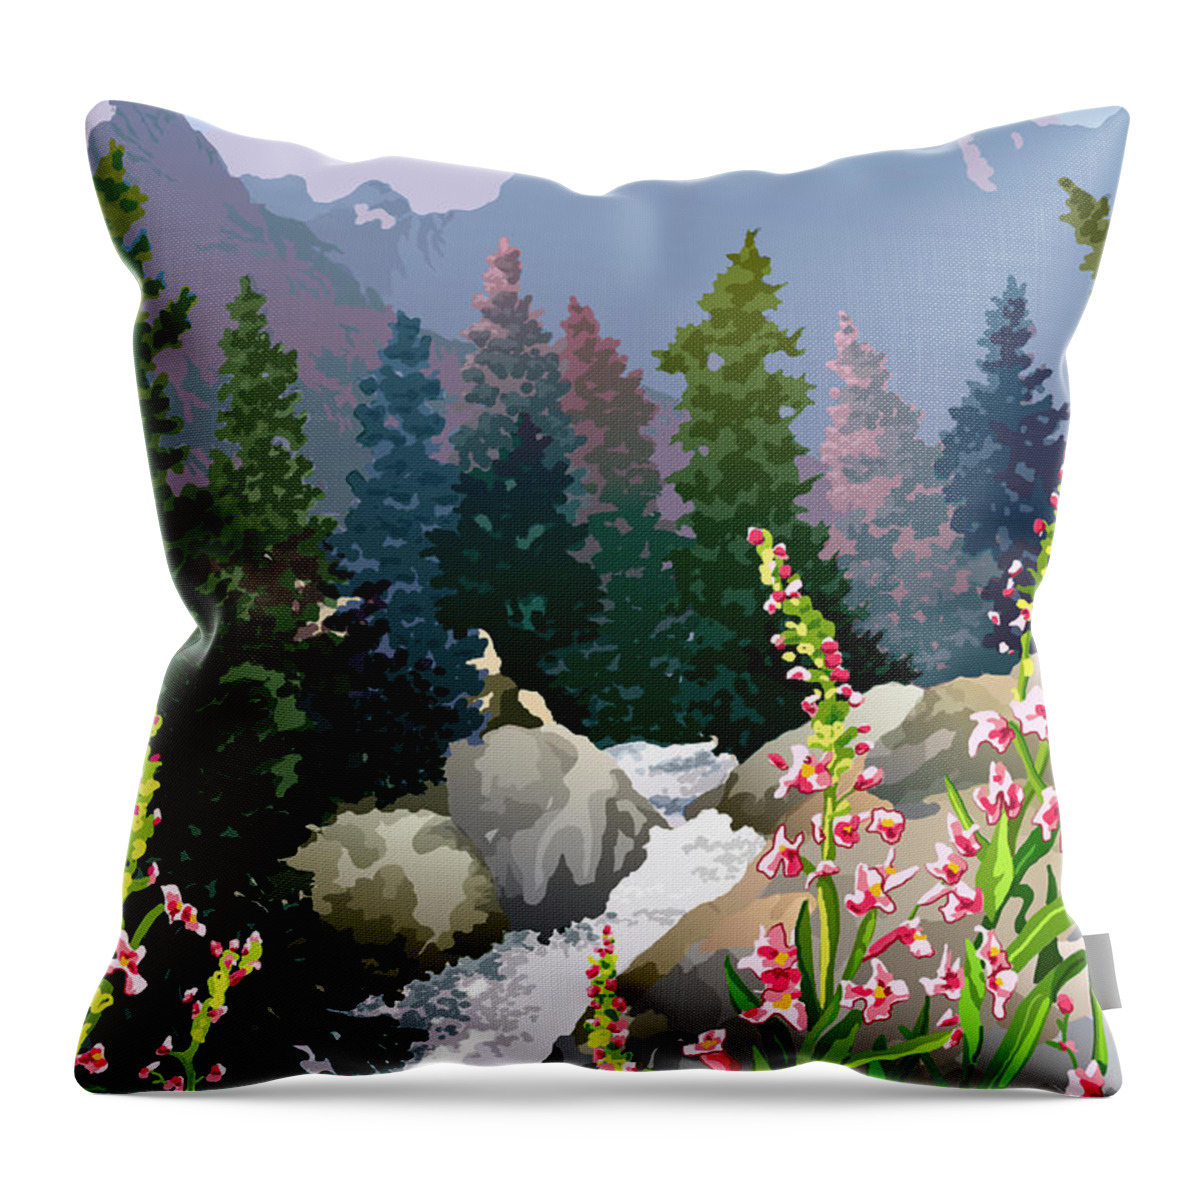 Rocky Mountains Throw Pillow featuring the digital art Mountain Stream by Anne Gifford